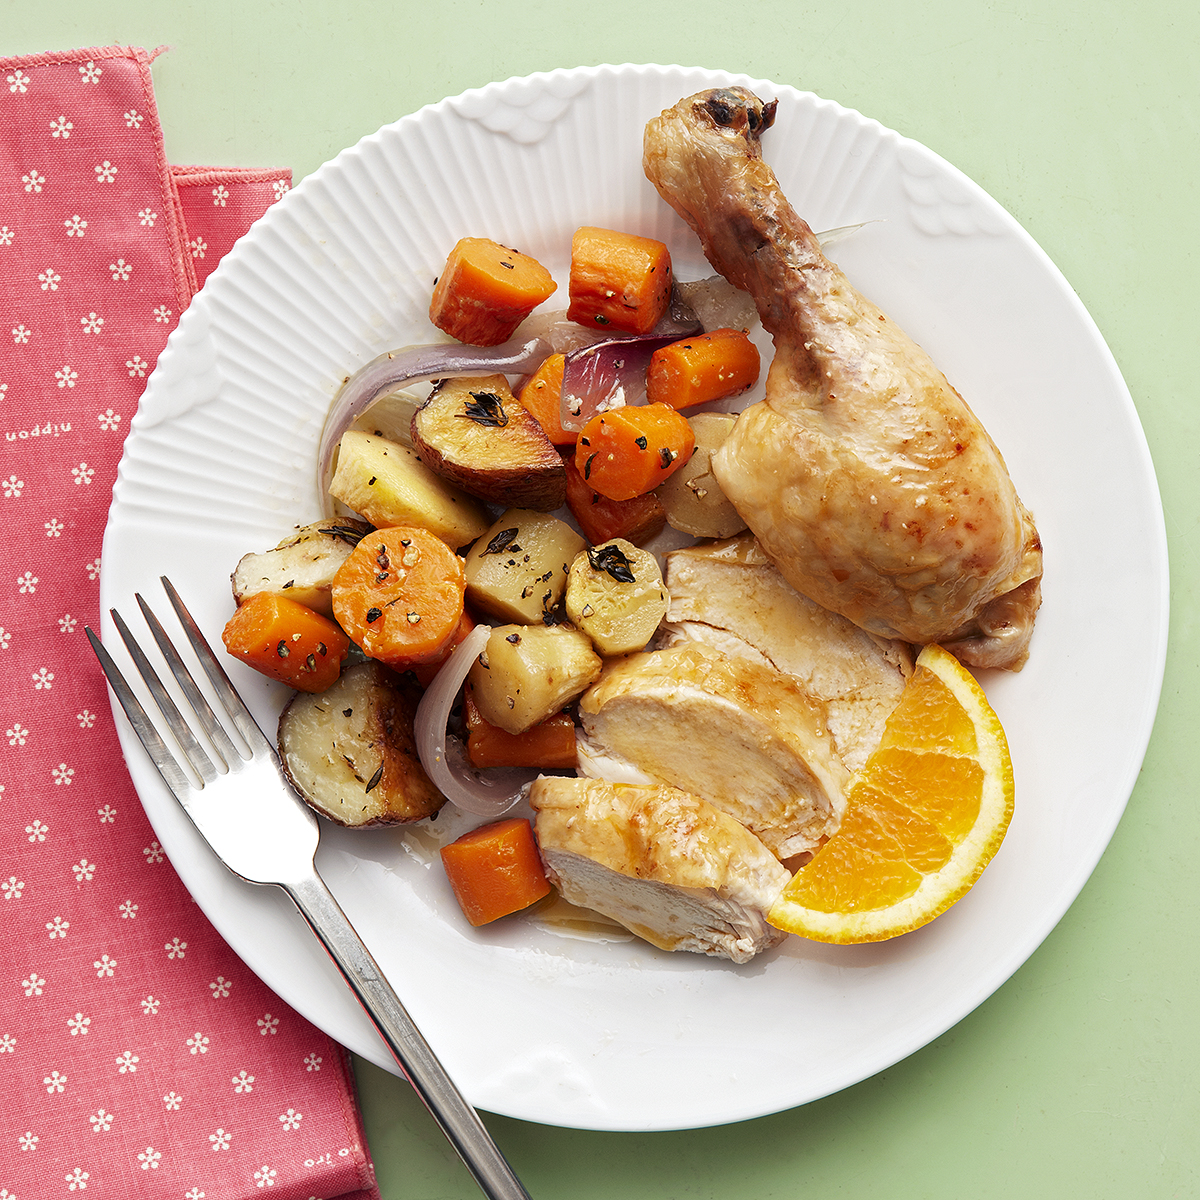 roasted chicken with winter vegetables